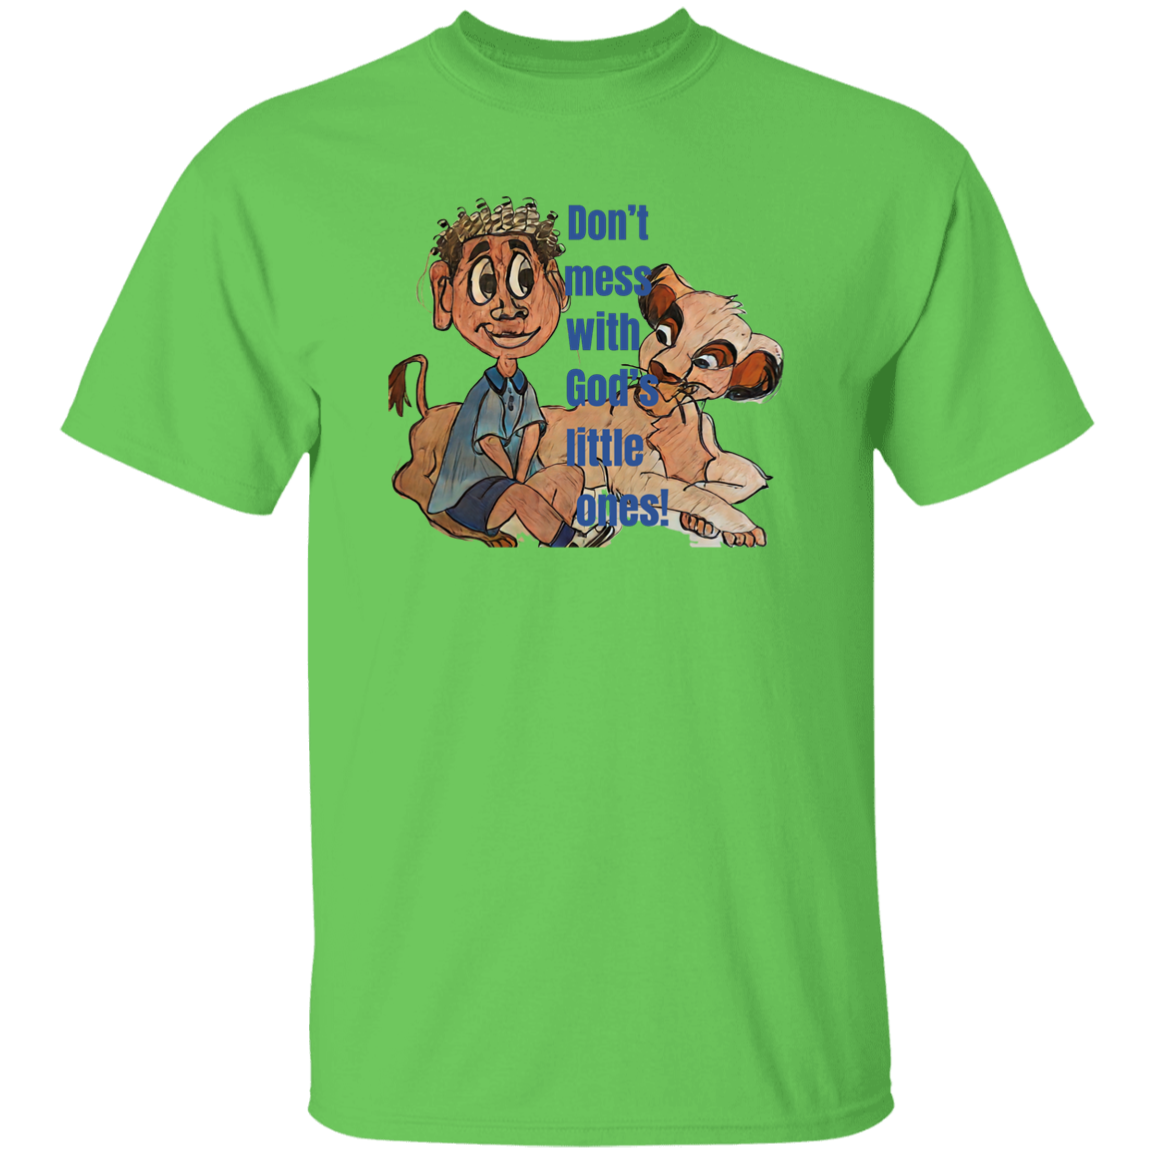 Don't mess with God's little ones Youth 5.3 oz 100% Cotton T-Shirt